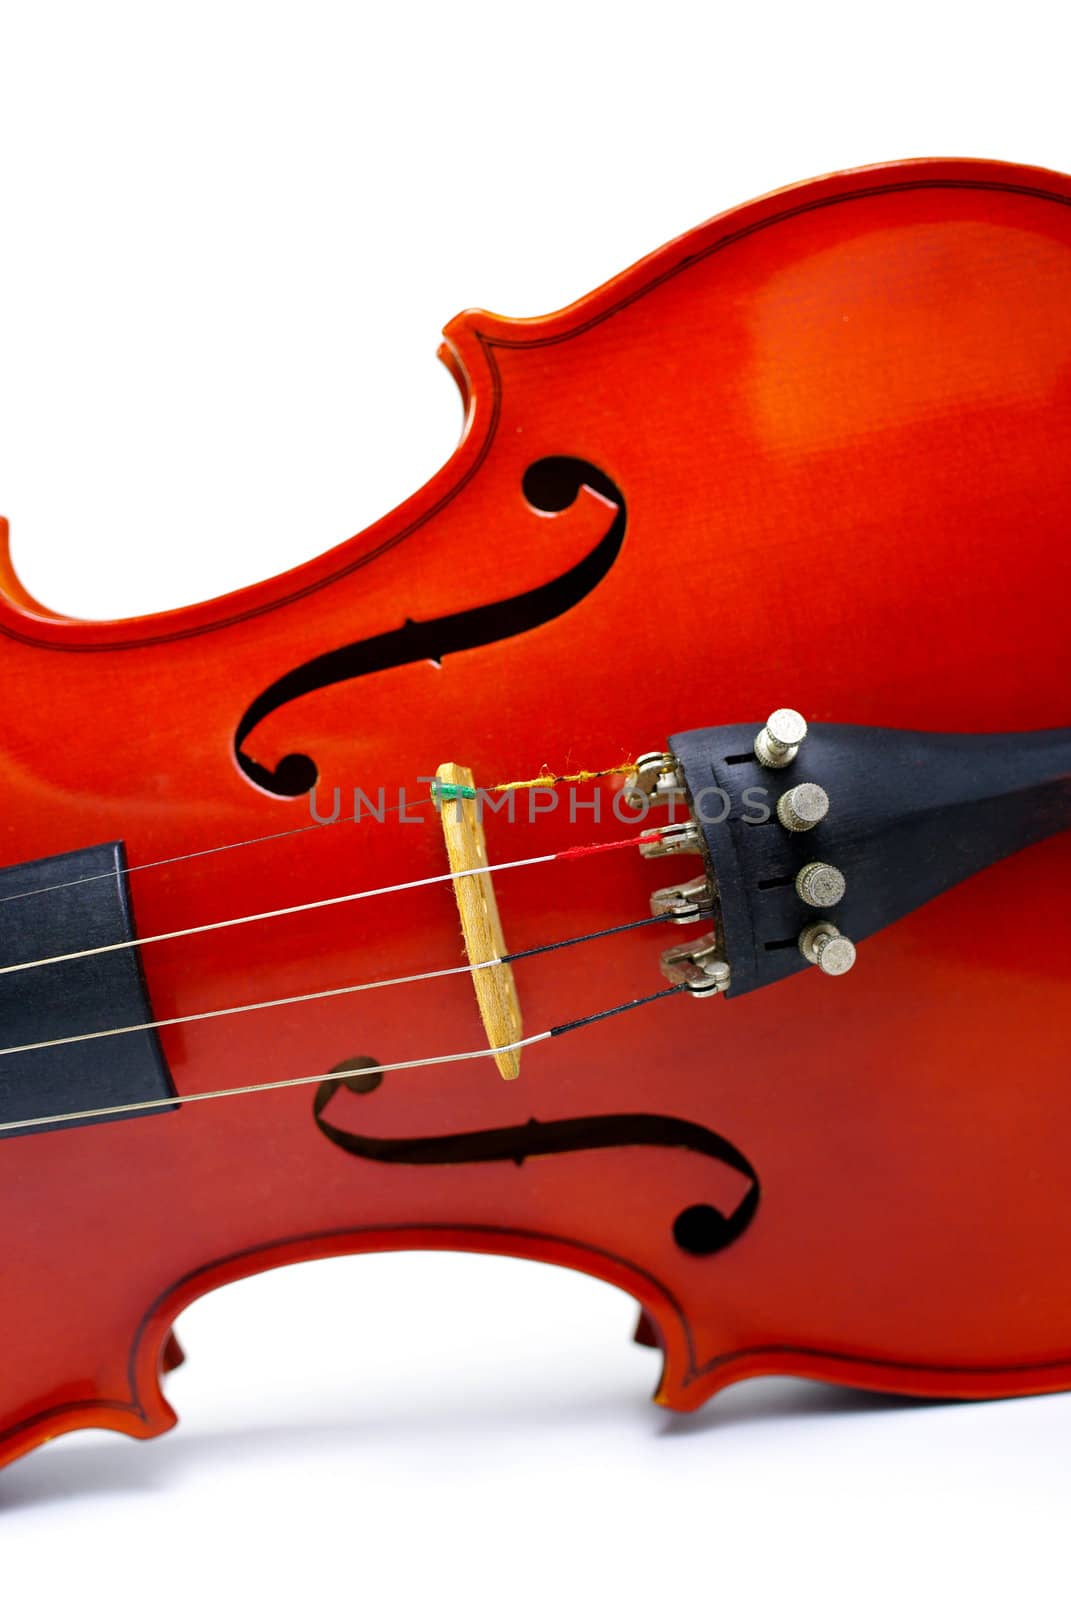 Close-up of a classic violin on white background  by pixbox77